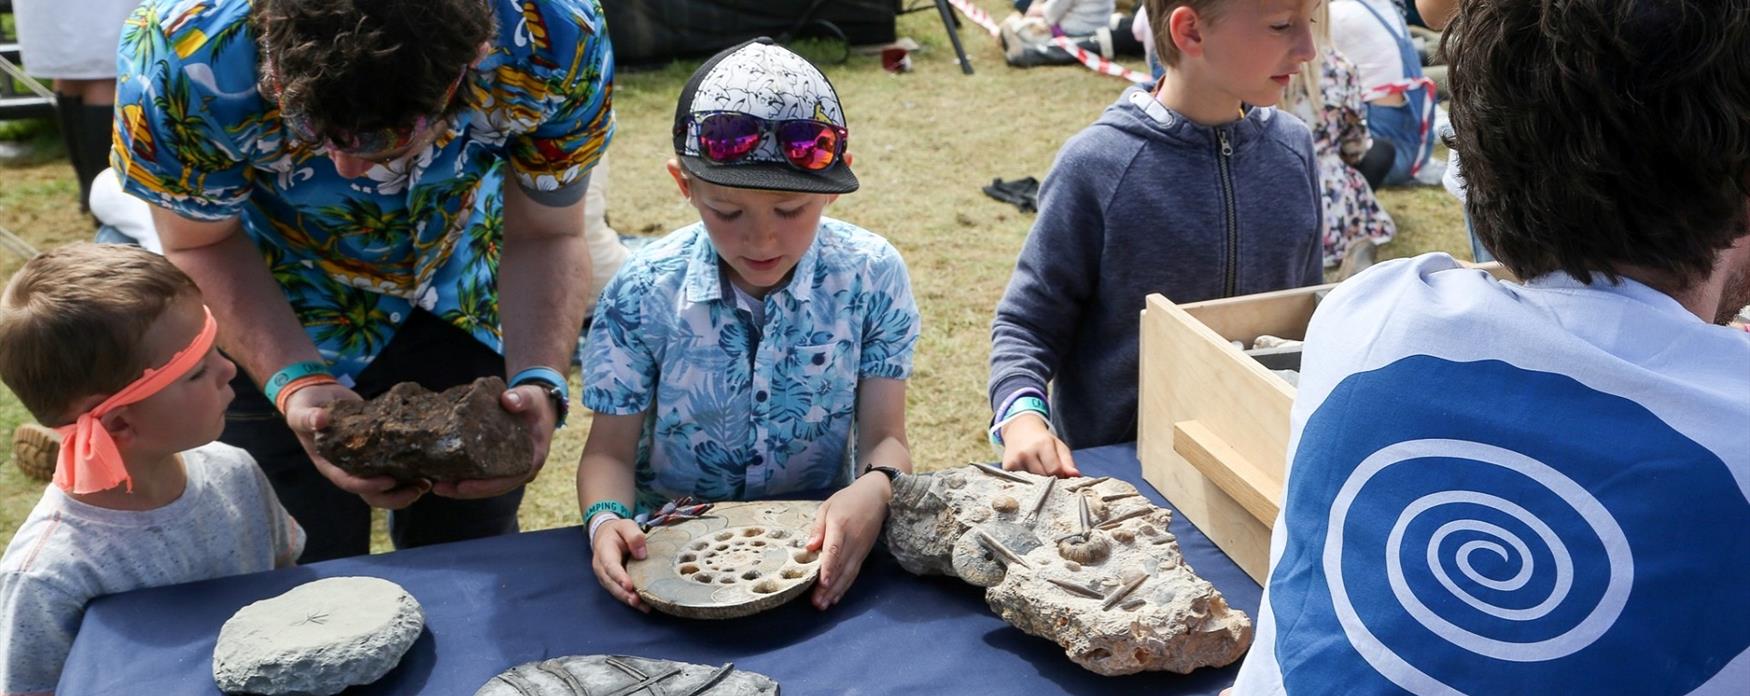 Discovering fossils at Camp Bestival in Dorset